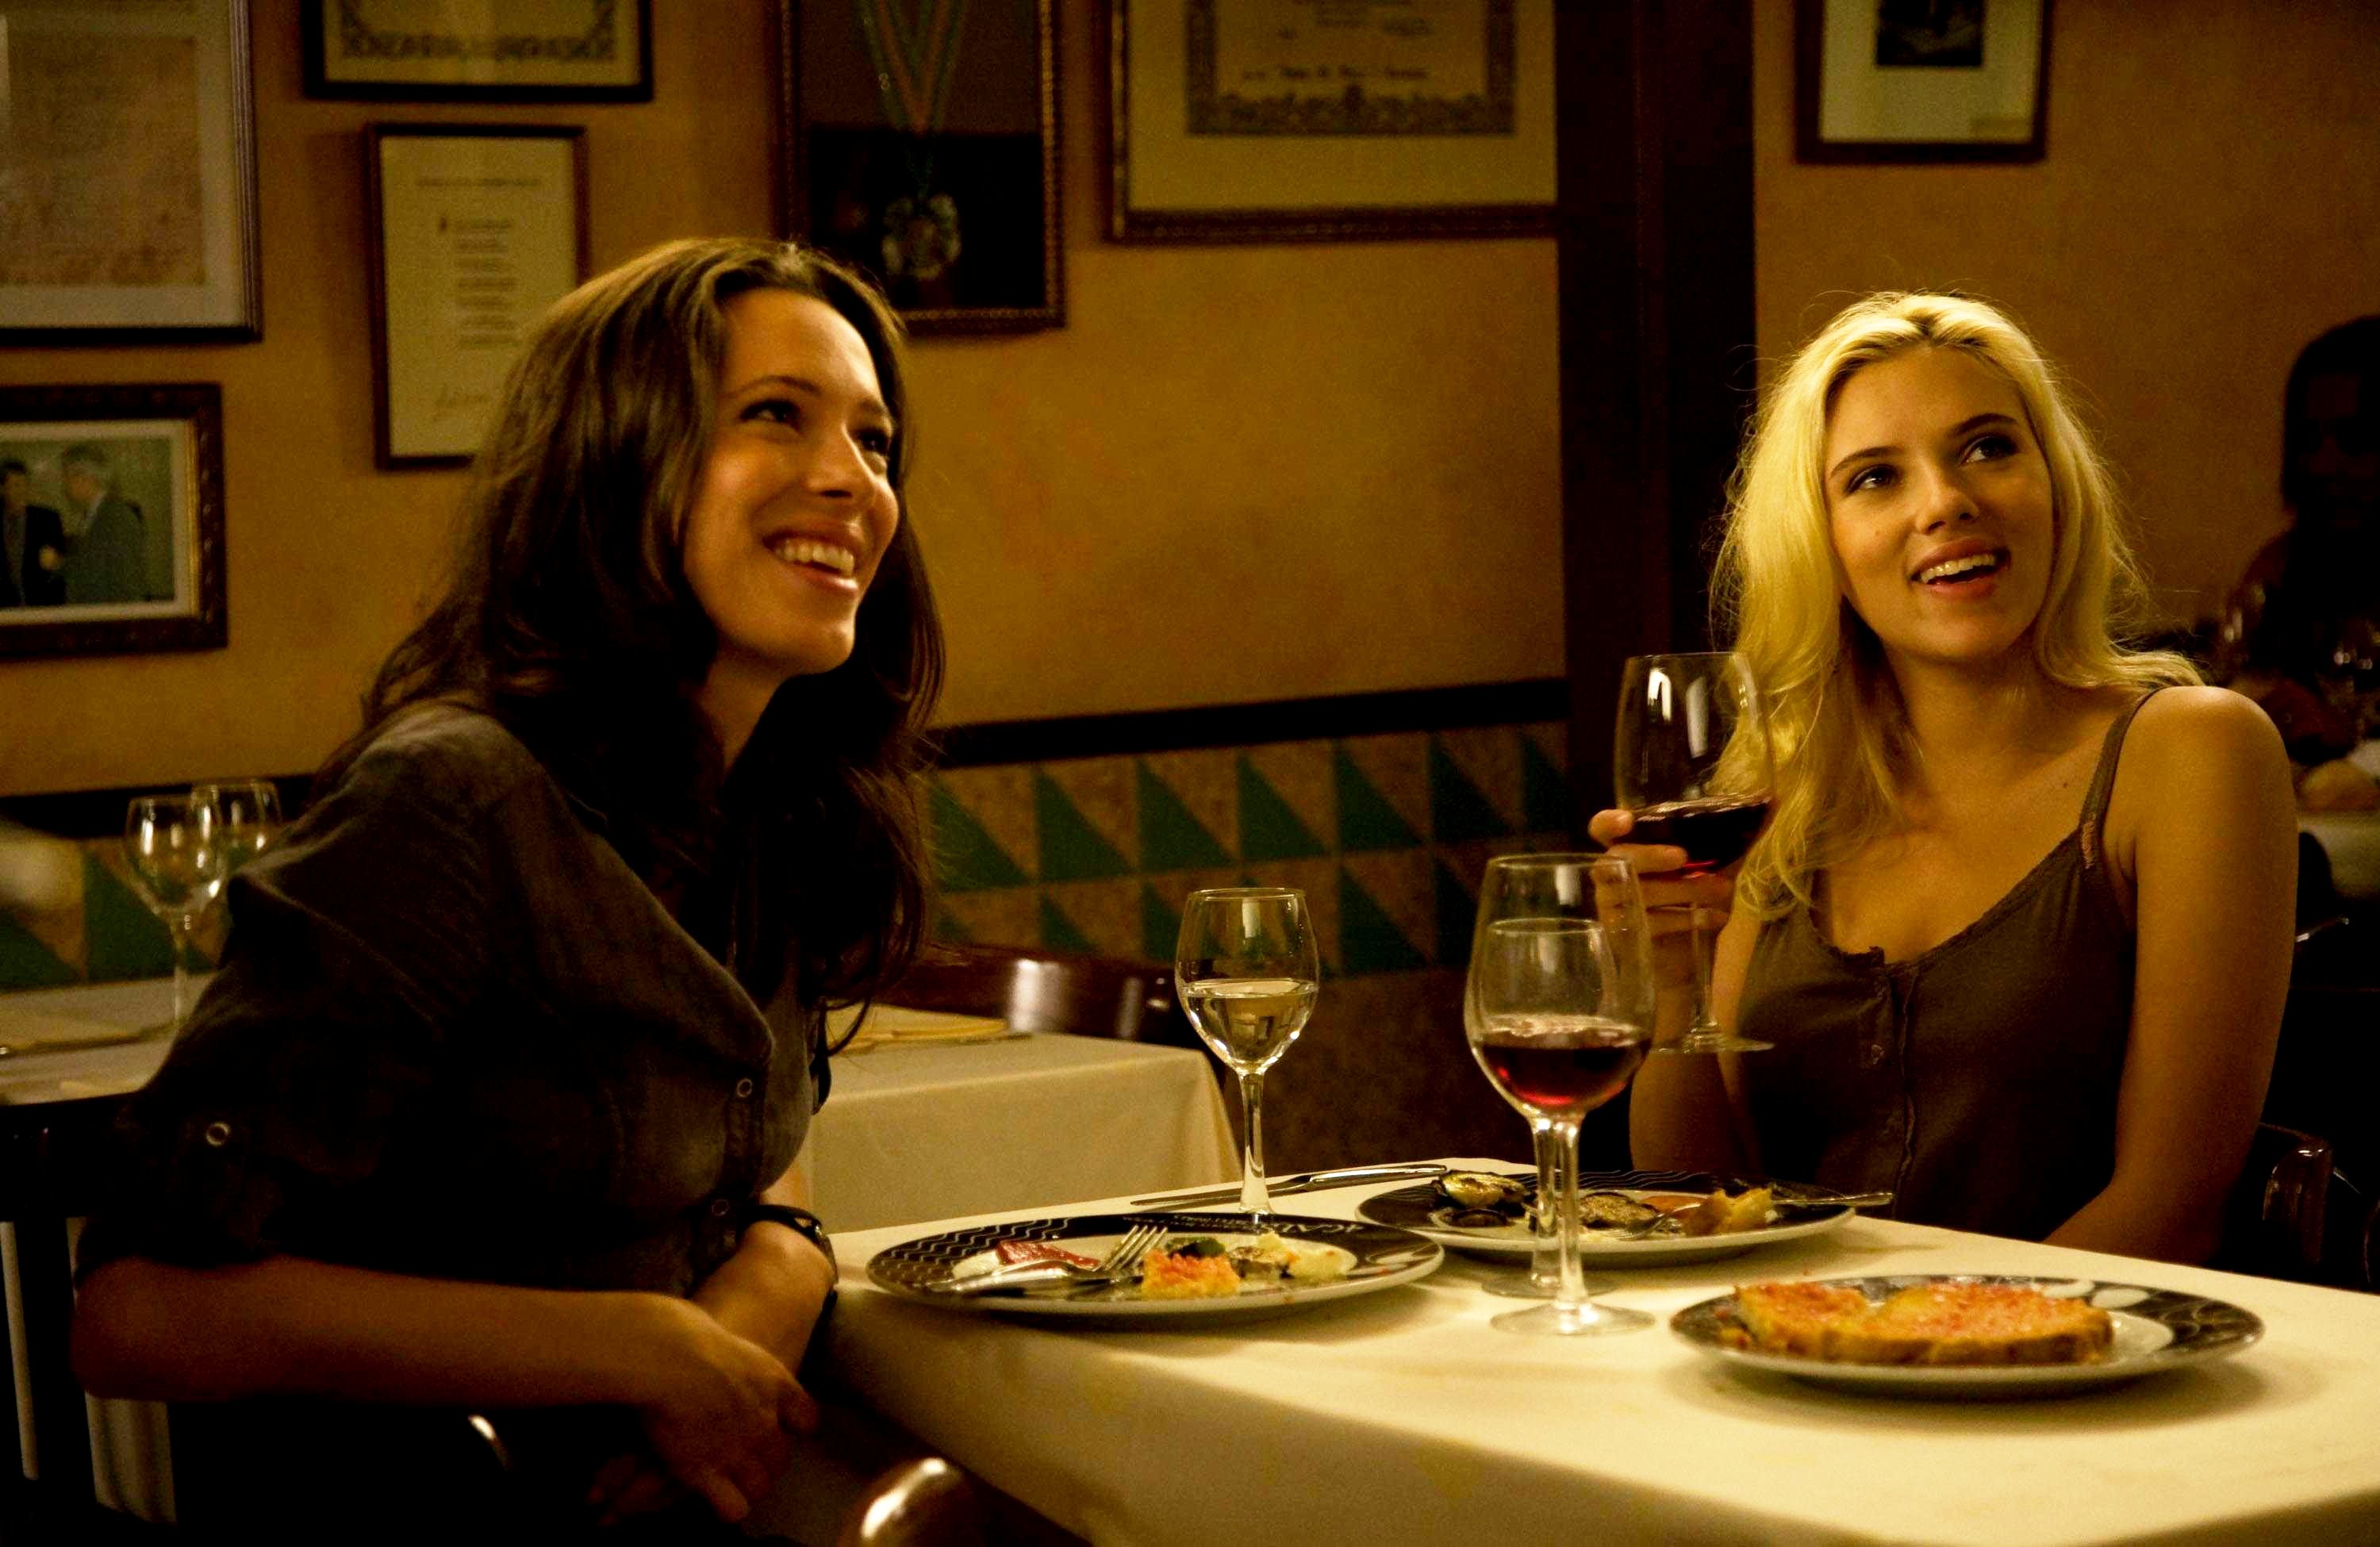 Rebecca Hall stars as Vicky and Scarlett Johansson stars as Cristina in The Weinstein Company's Vicky Cristina Barcelona (2008). Photo Credit by Victor Bello.